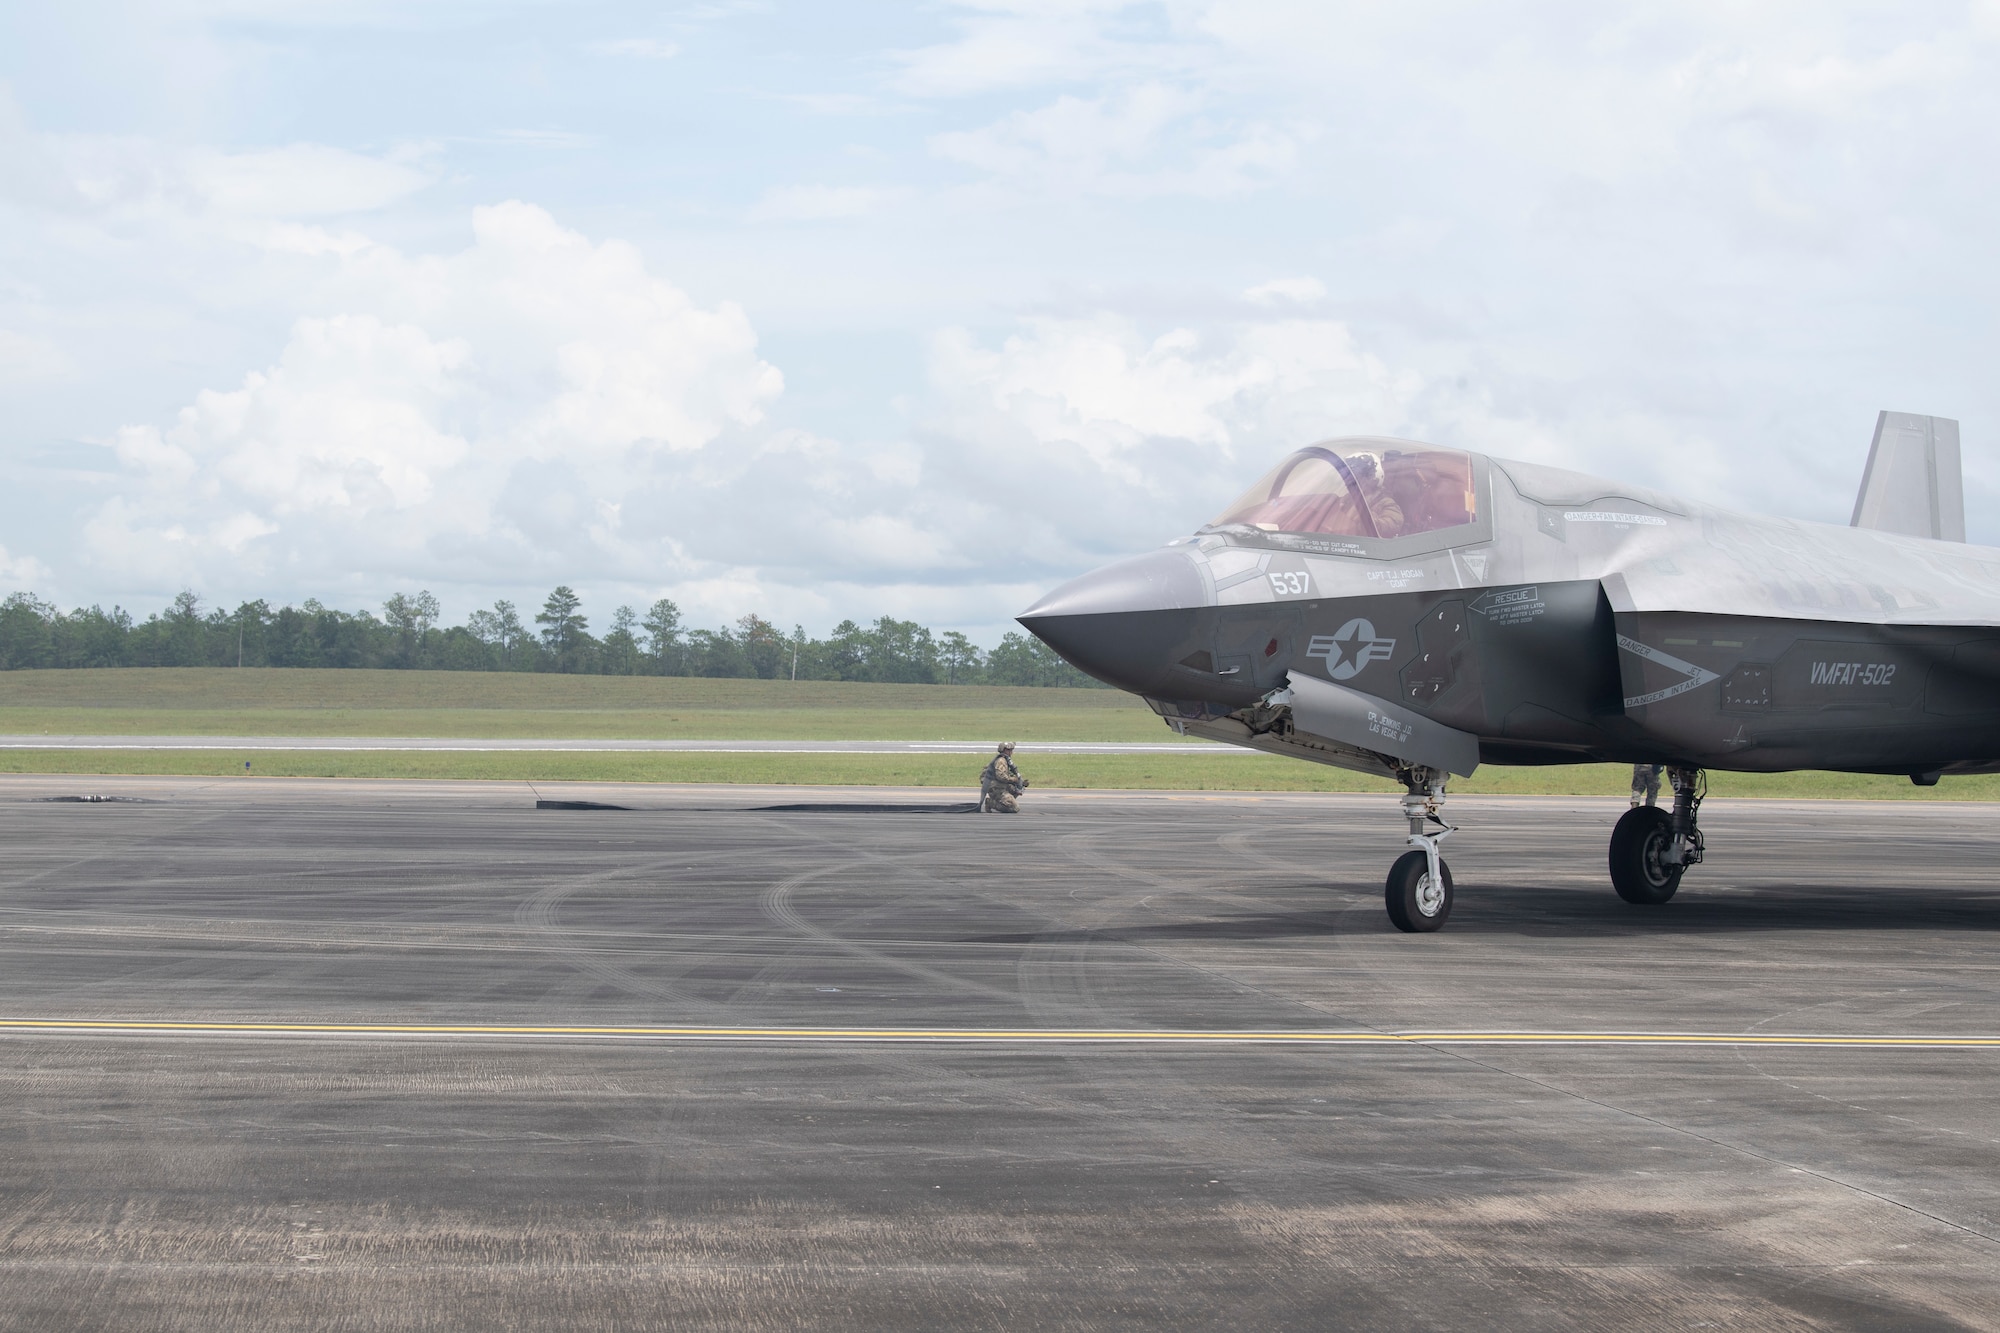 An F-35B Lightning II taxis on a runway during a forward arming and refueling point, or FARP, demonstration at Duke Field, Florida, July 21, 2021. Capabilities like FARP ensure Airmen have multiple tools to accomplish a refueling mission in any environment, no matter how austere. (U.S. Air Force photo by Staff Sgt. Janiqua P. Robinson)